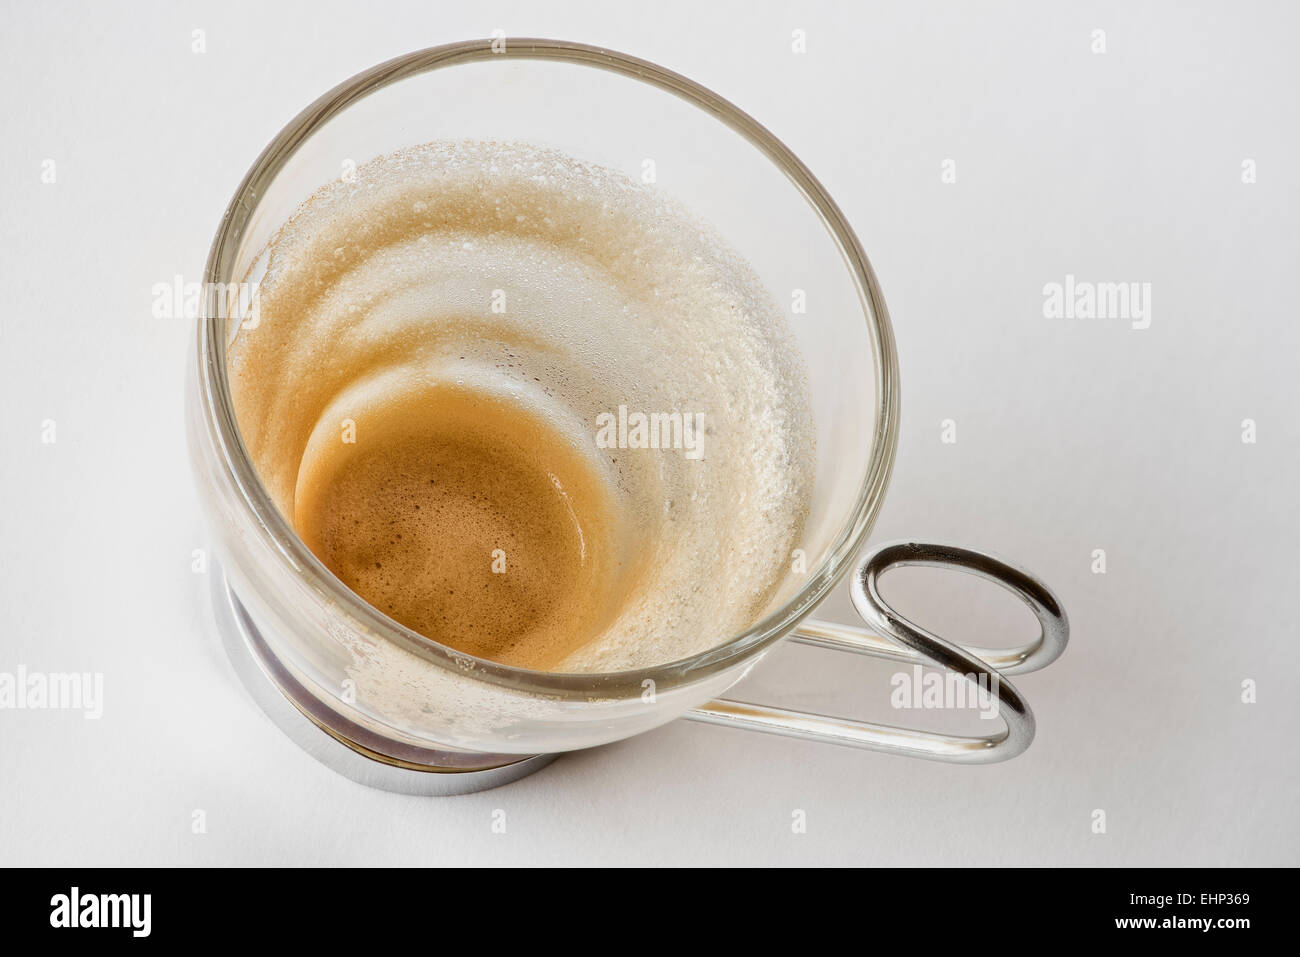 Cup of coffee with rests of coffee spume Stock Photo